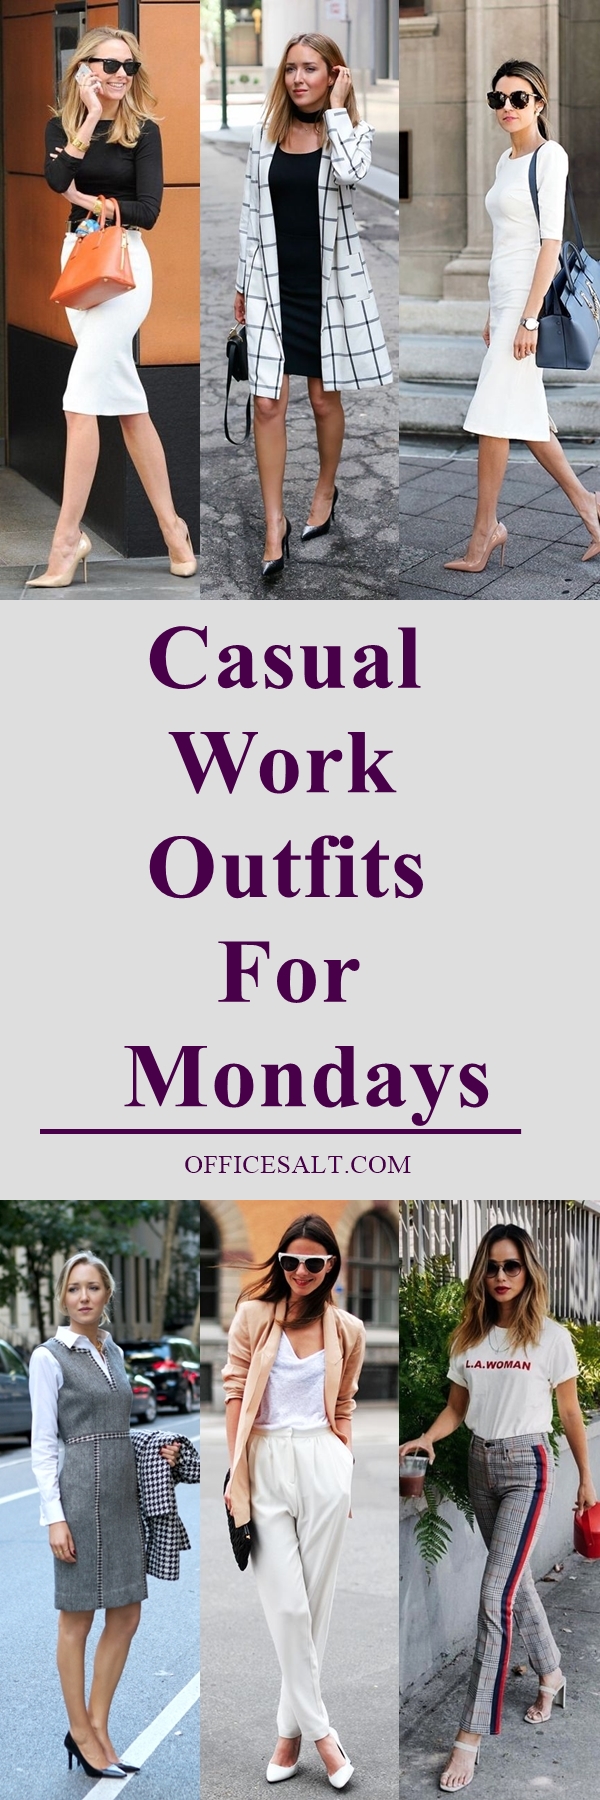 40 Casual Work Outfits For Mondays - Office Salt